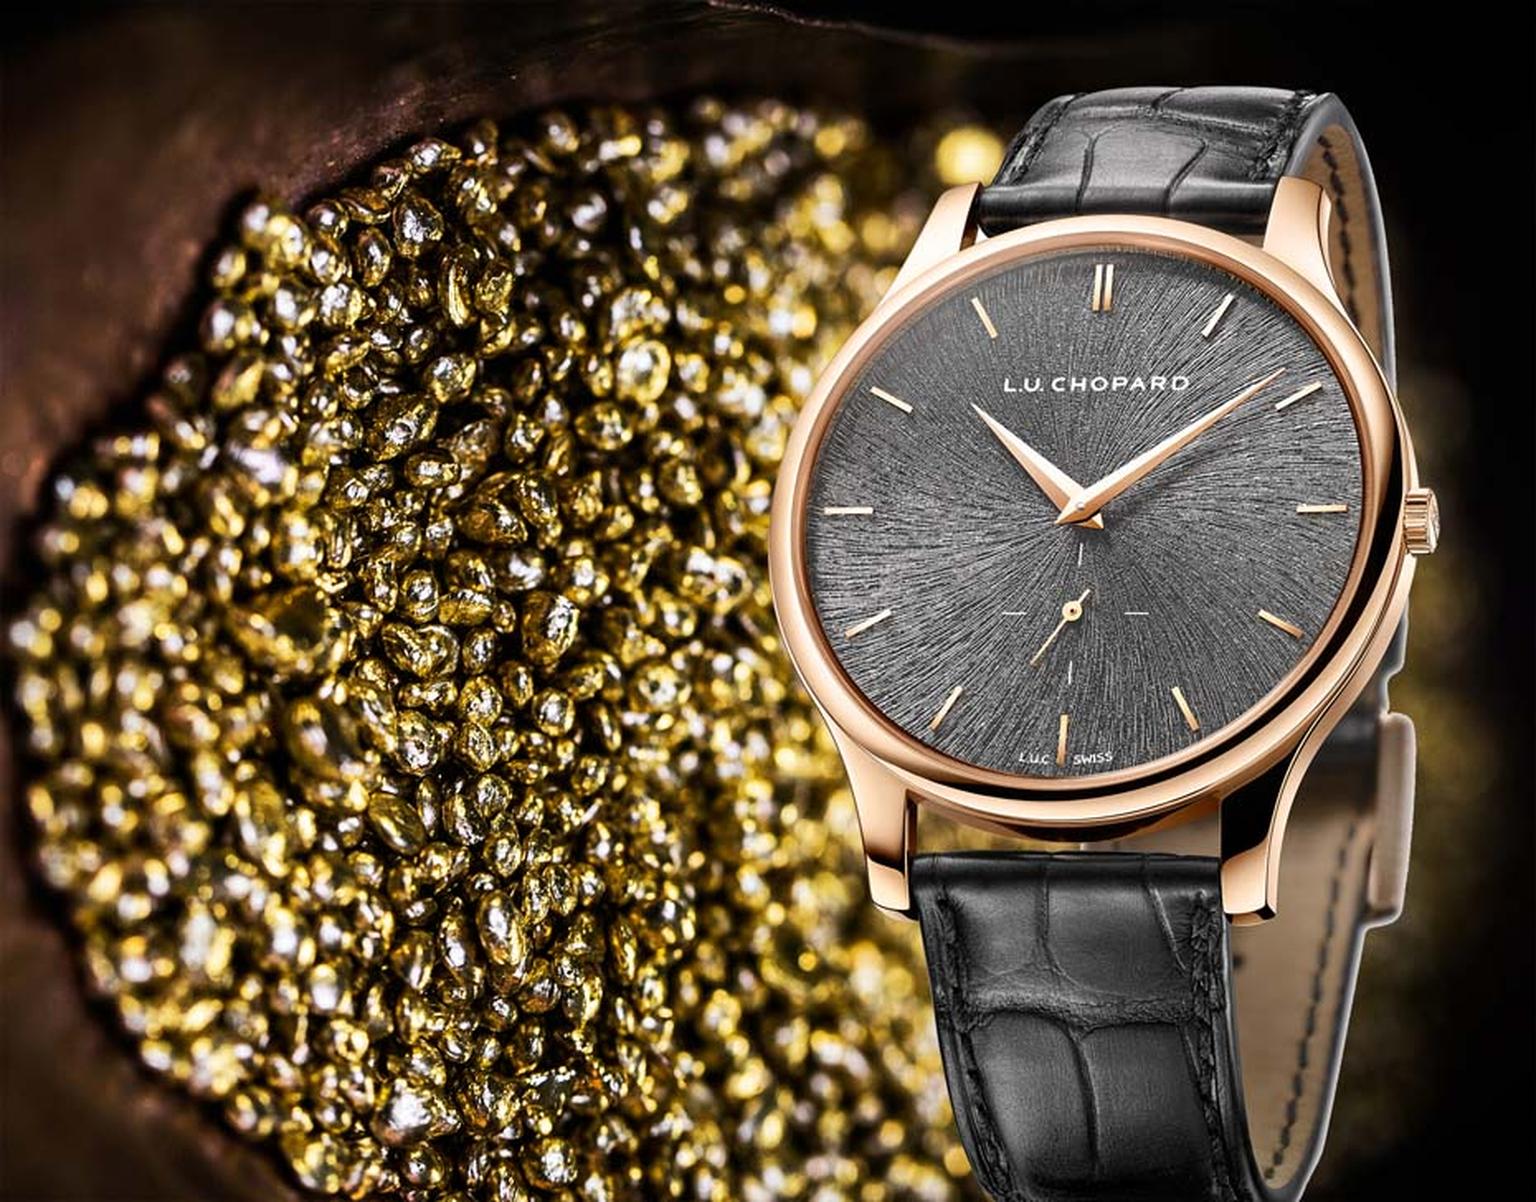 Chopard L.U.C XPS Fairmined gold watch is a limited edition of 250 pieces and is available exclusively in Chopard boutiques.